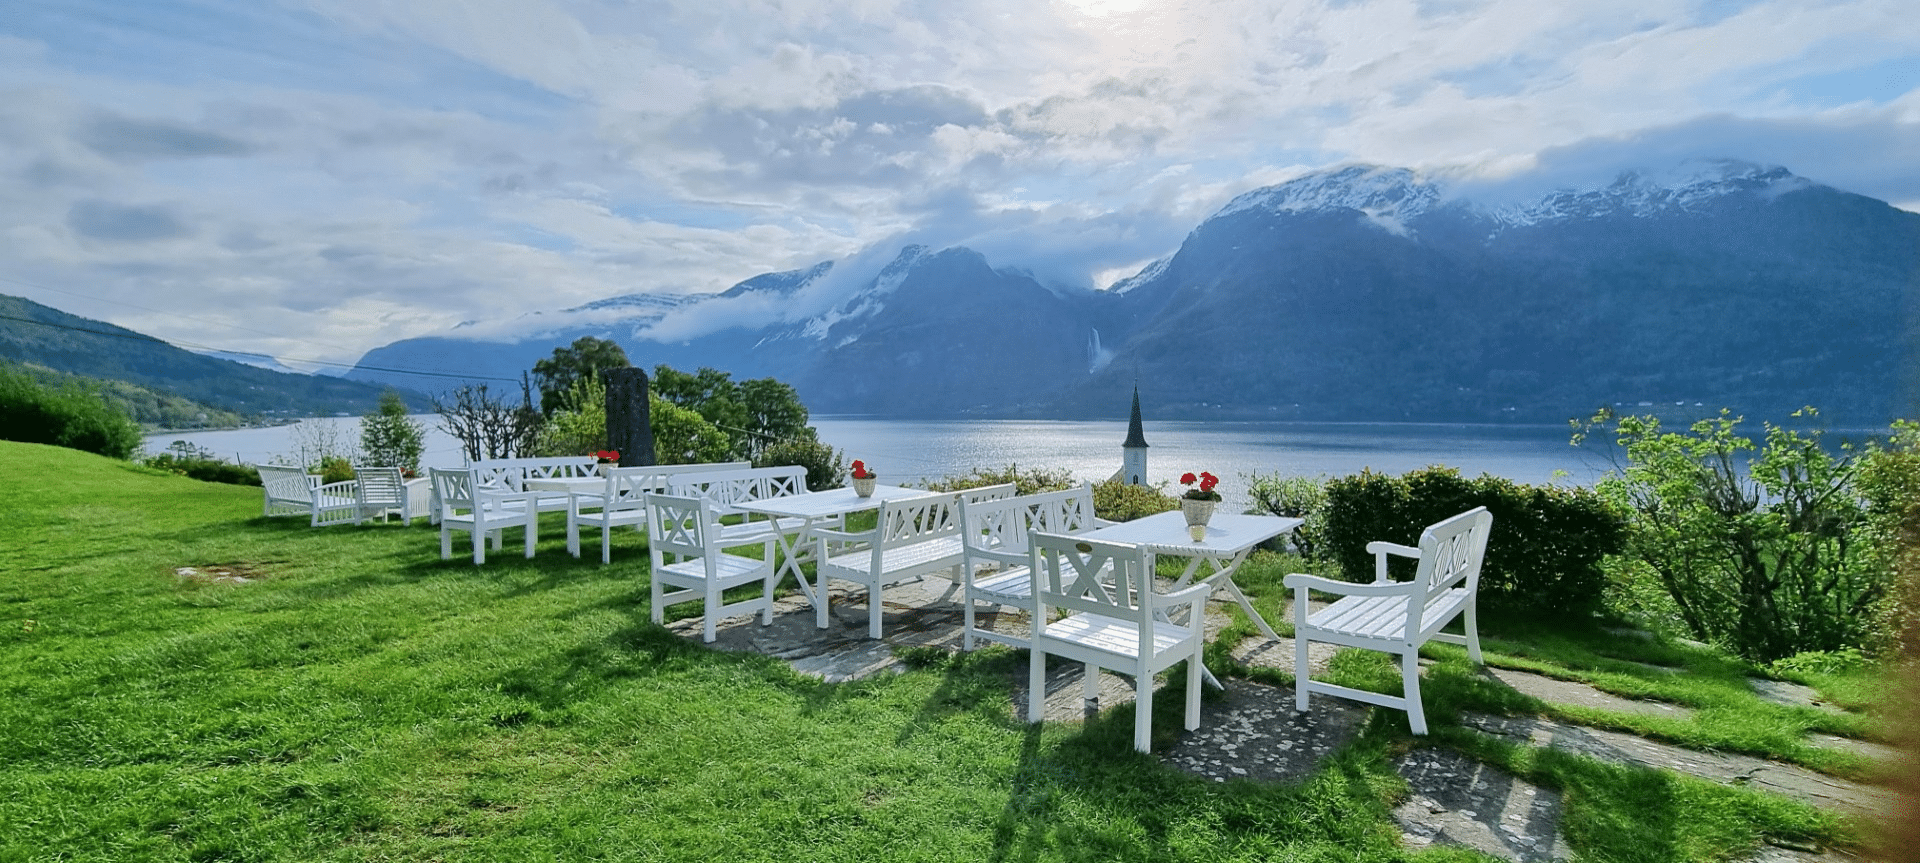 Enjoy a scenic picnic spot in Norway